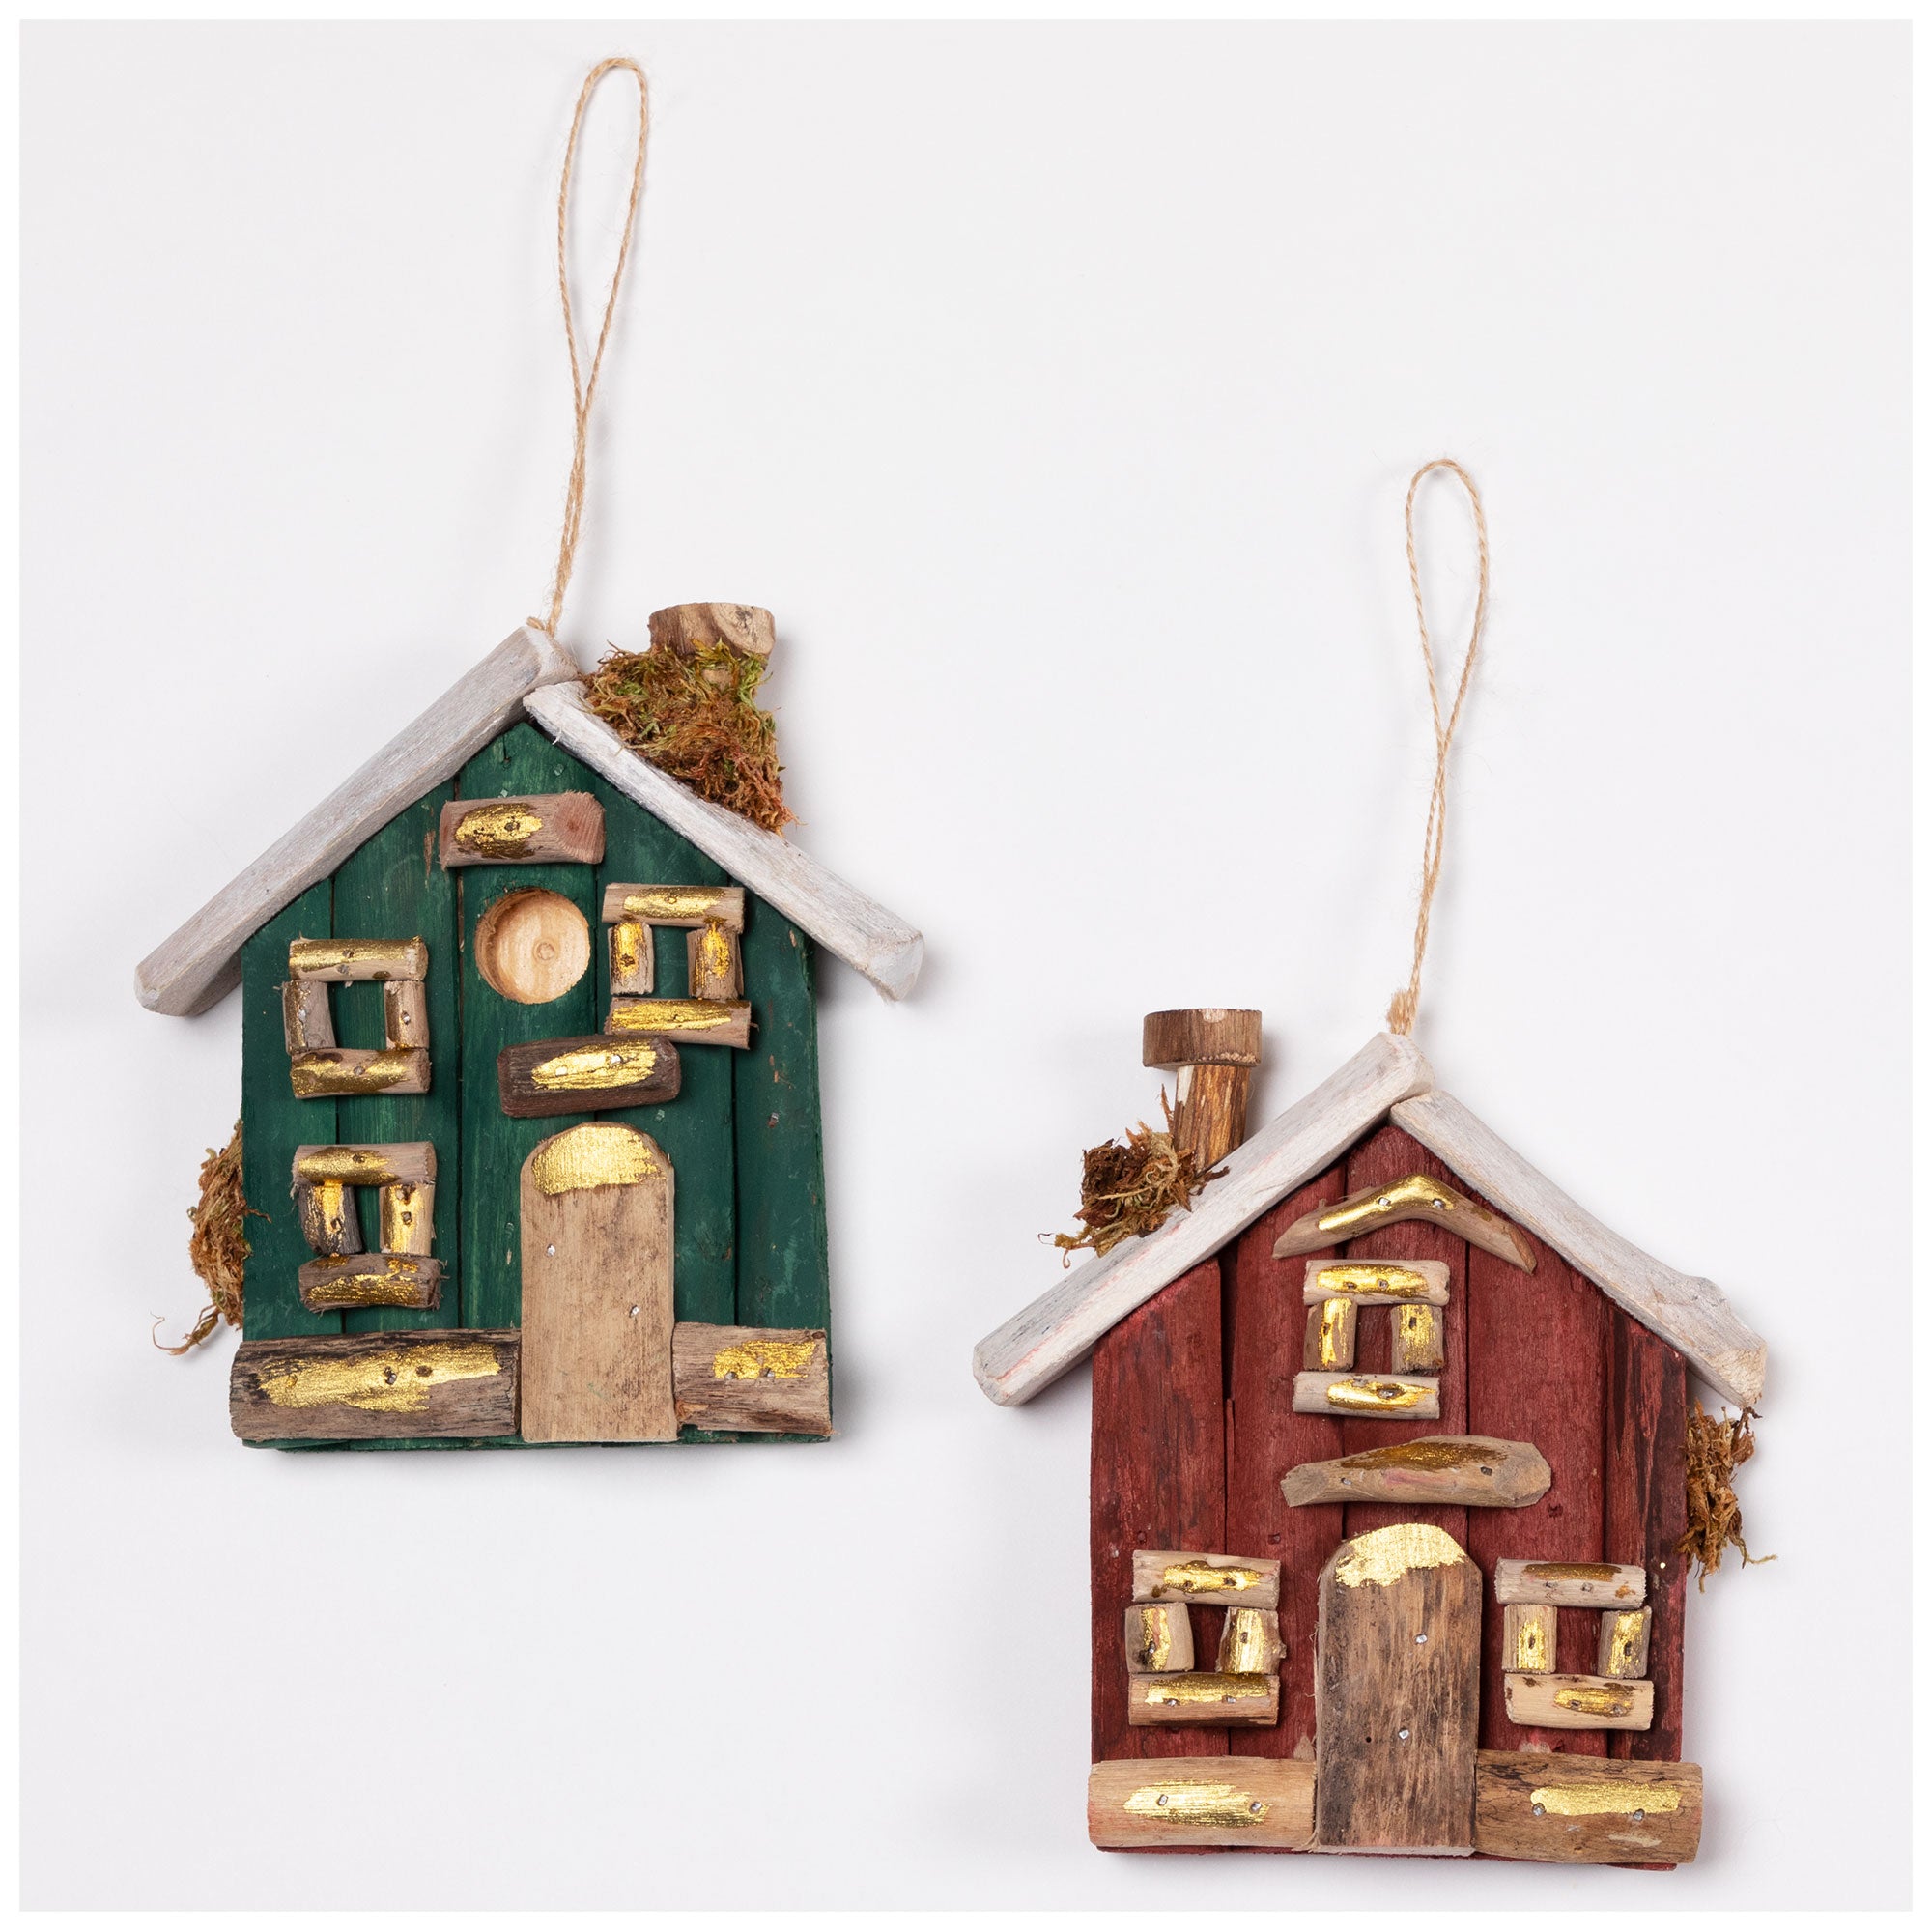 Handmade Recycled Driftwood Christmas House Ornament - Green